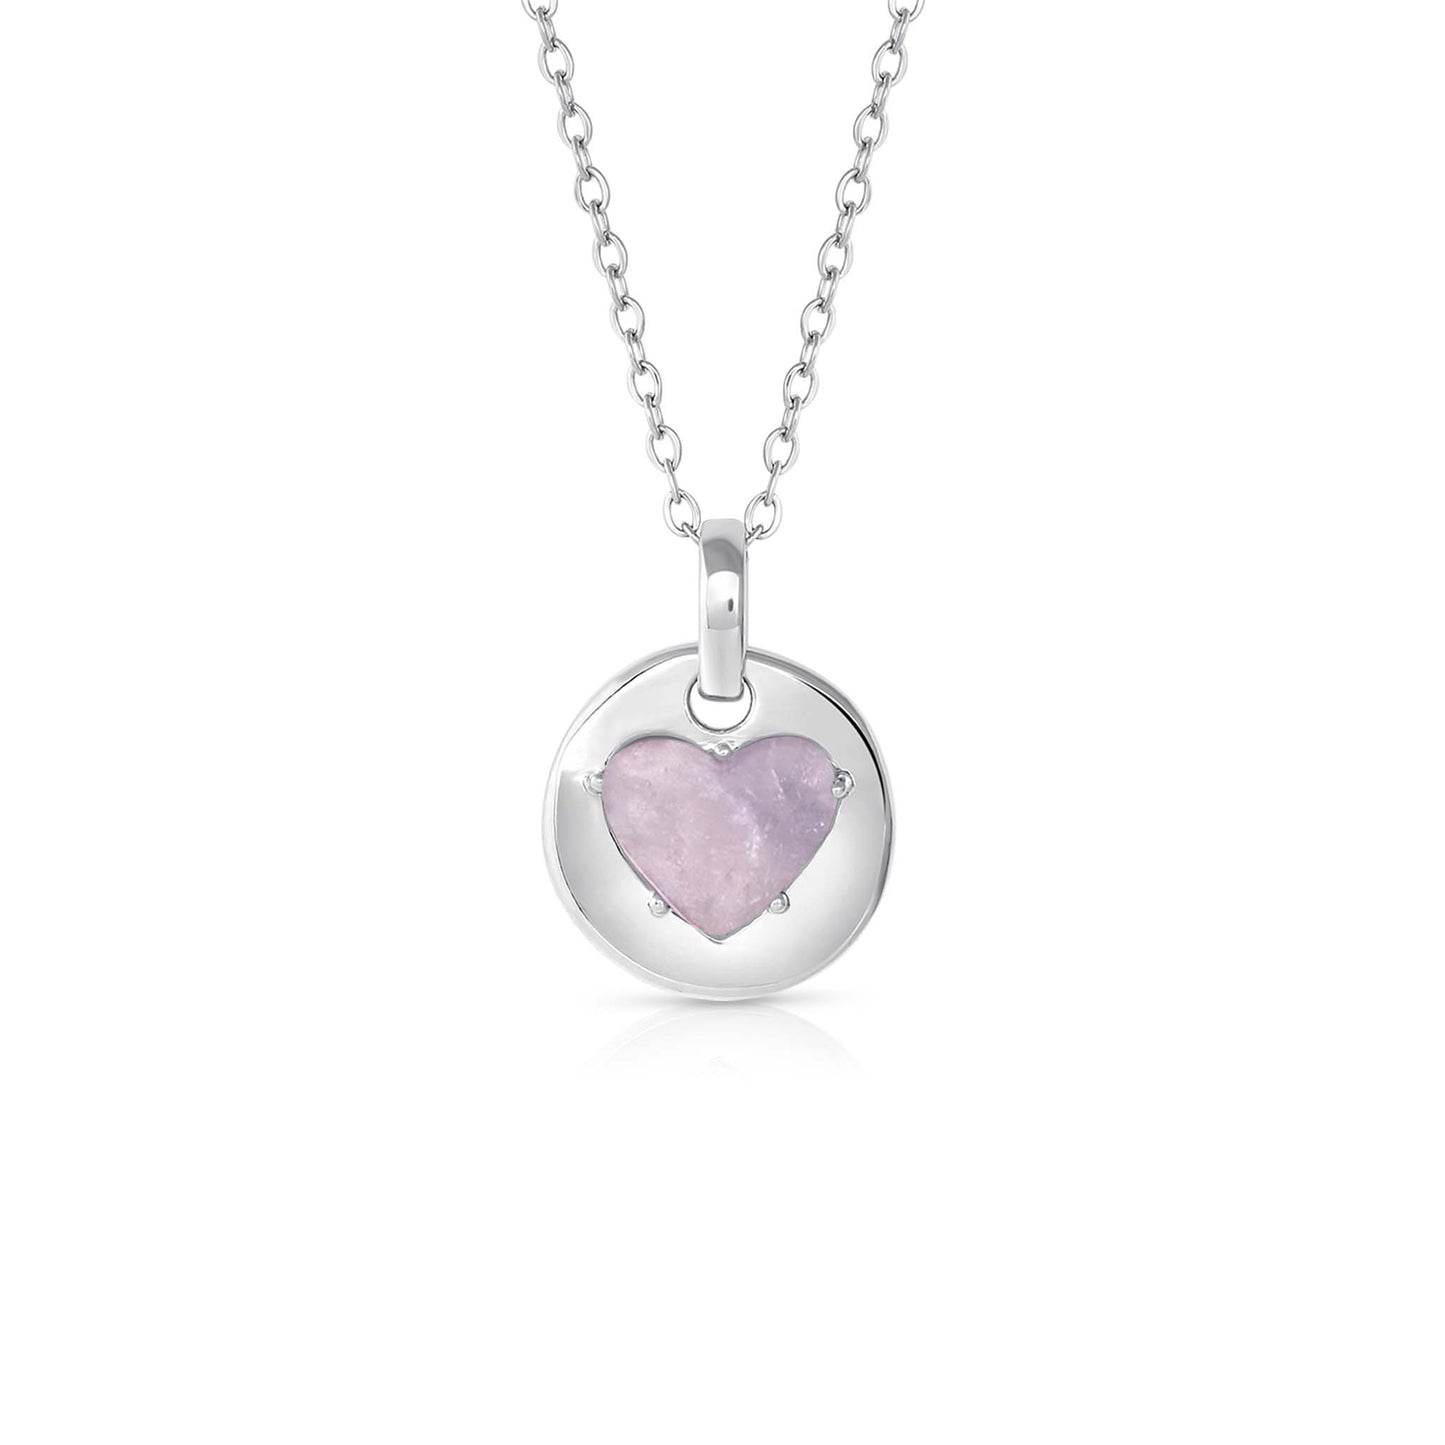 Amethyst is February's birthstone and the gem for the 6th wedding anniversary. This unique charm necklace is the perfect gift for yourself, Mother's Day, Valentine's Day, graduation, Christmas and birthdays. A personalized gift idea for every mom, grandma, bride, bridesmaid, daughter, wife, mother-in-law & loved one. 